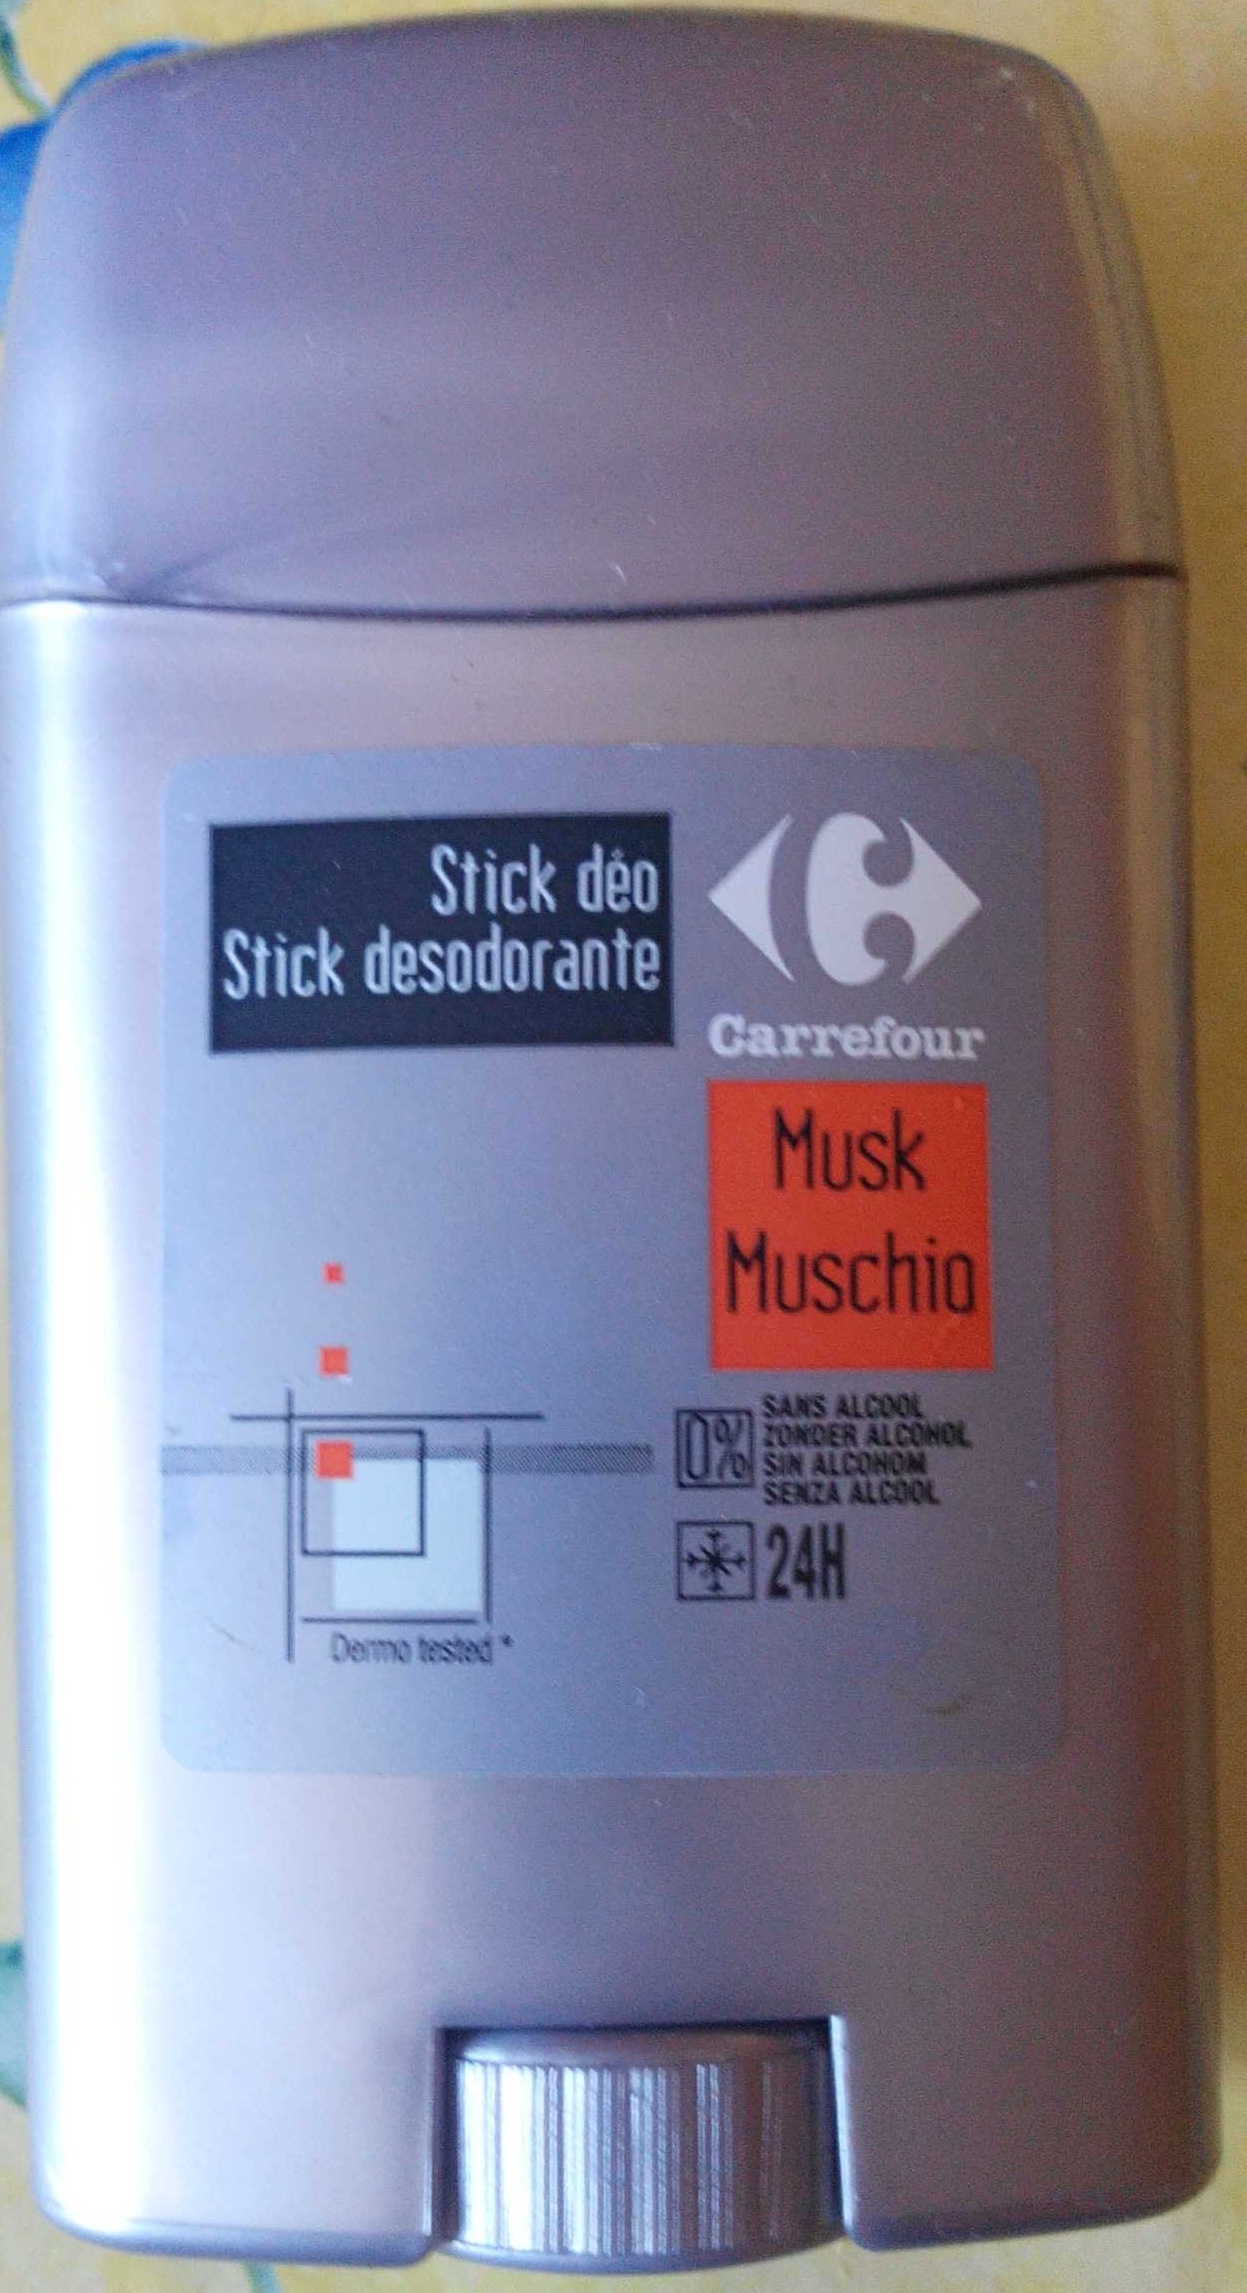 Stick déo Musk - Product - fr